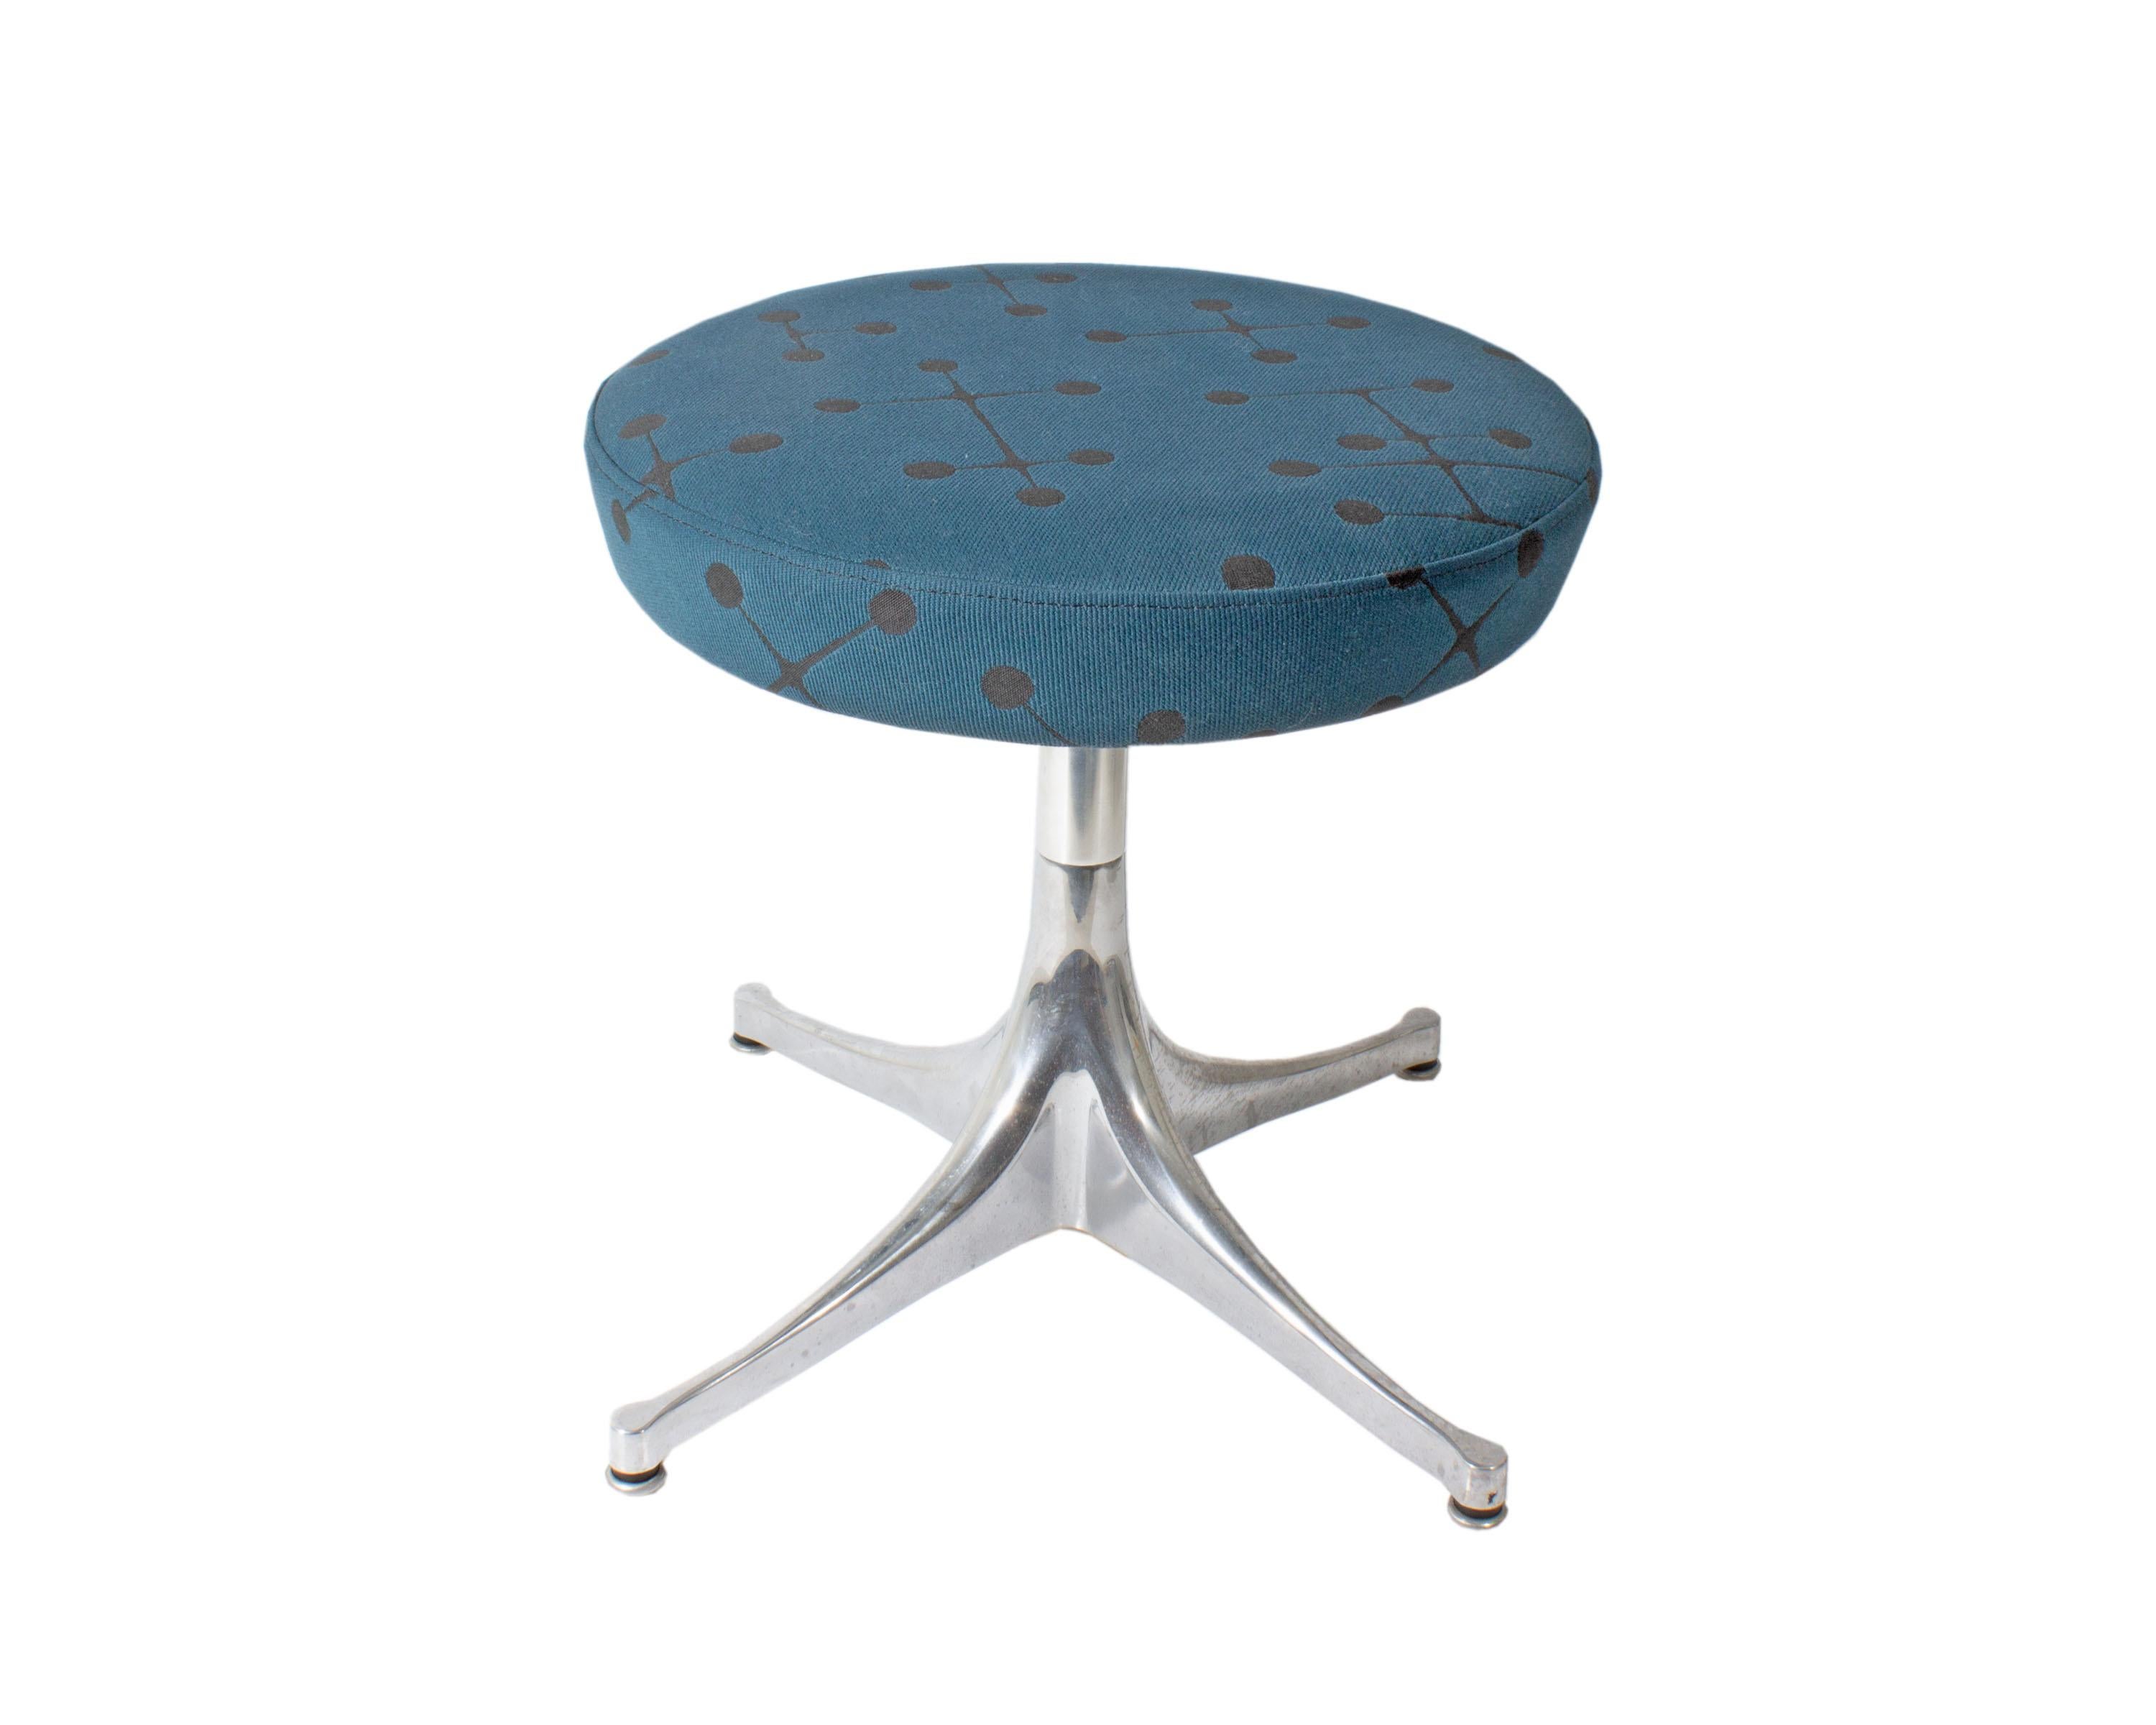 A pedestal stool originally designed by American designer George Nelson (1908-1986) for Herman Miller. The round stool features a padded seat covered in a galactic blue upholstery with a black atomic pattern by Maharam. The stool stands on a metal